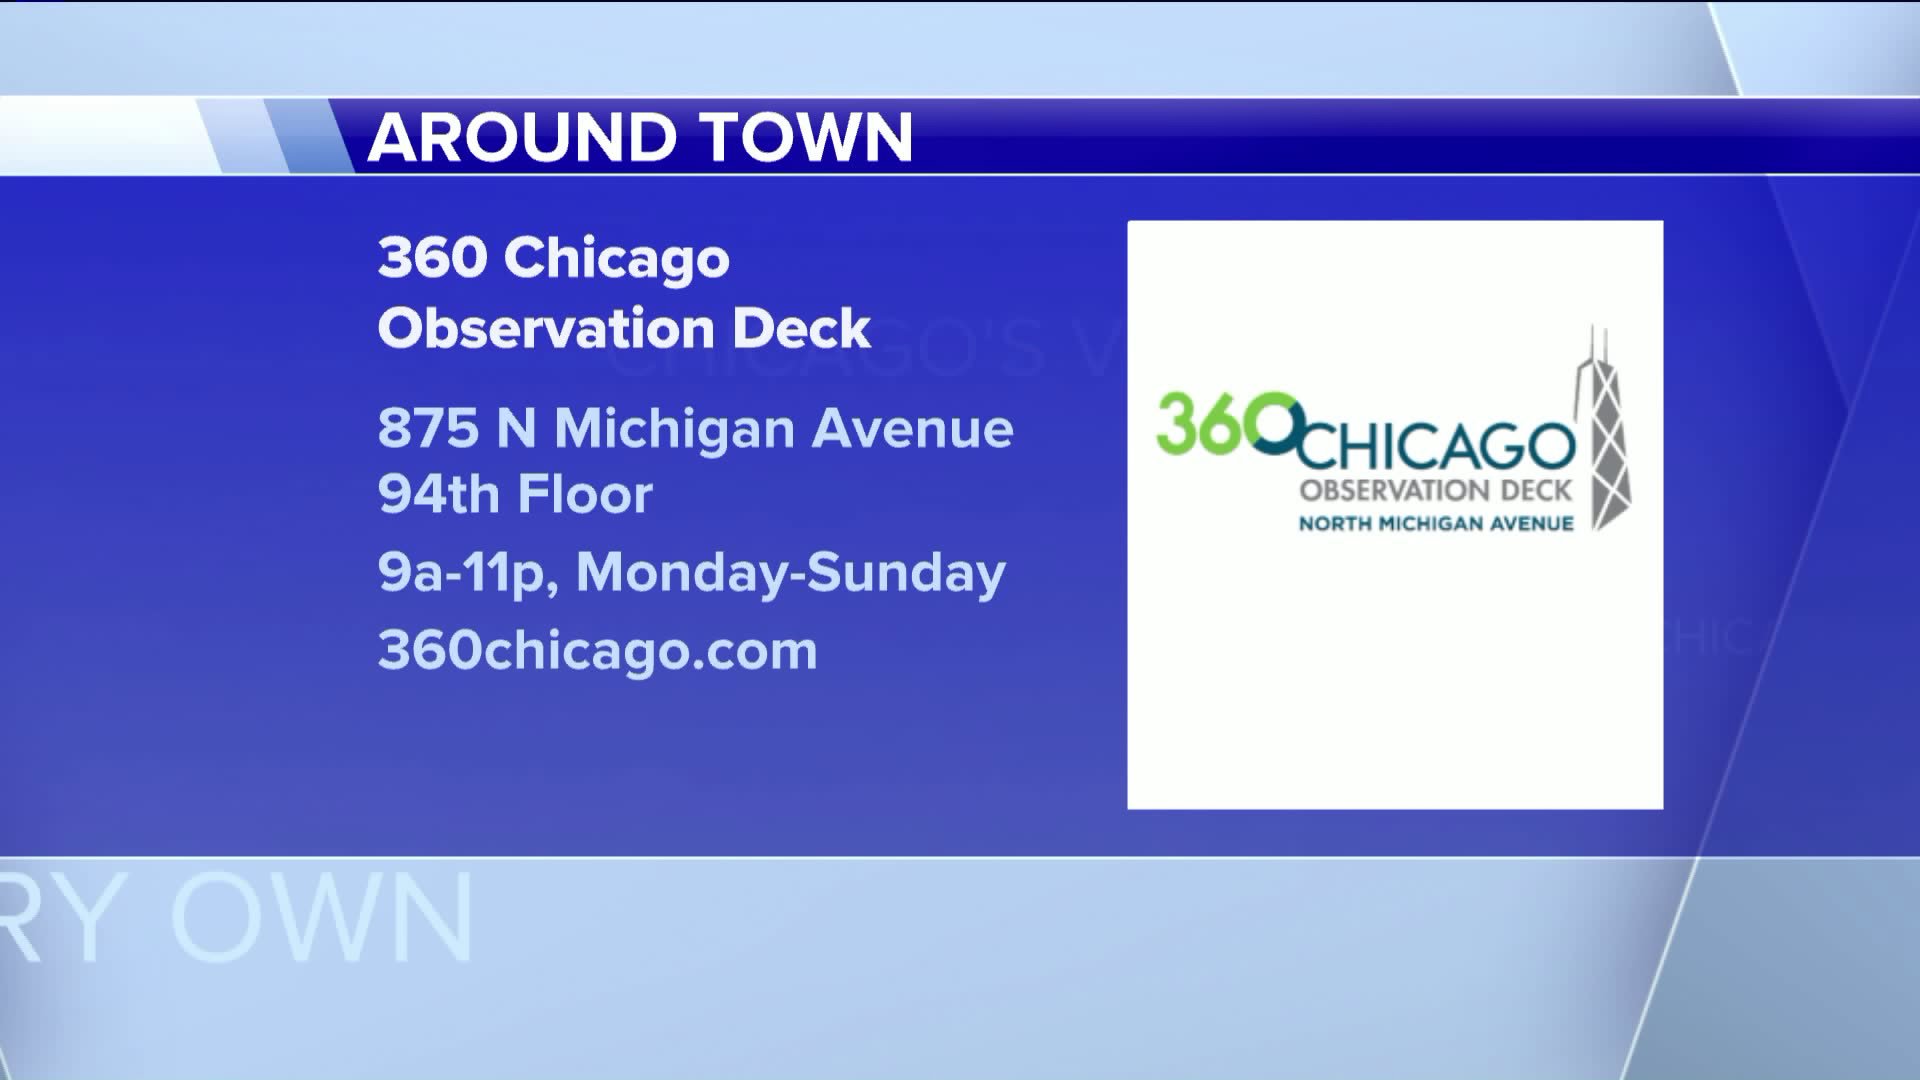 Around Town visits the 360 Chicago Observation Deck